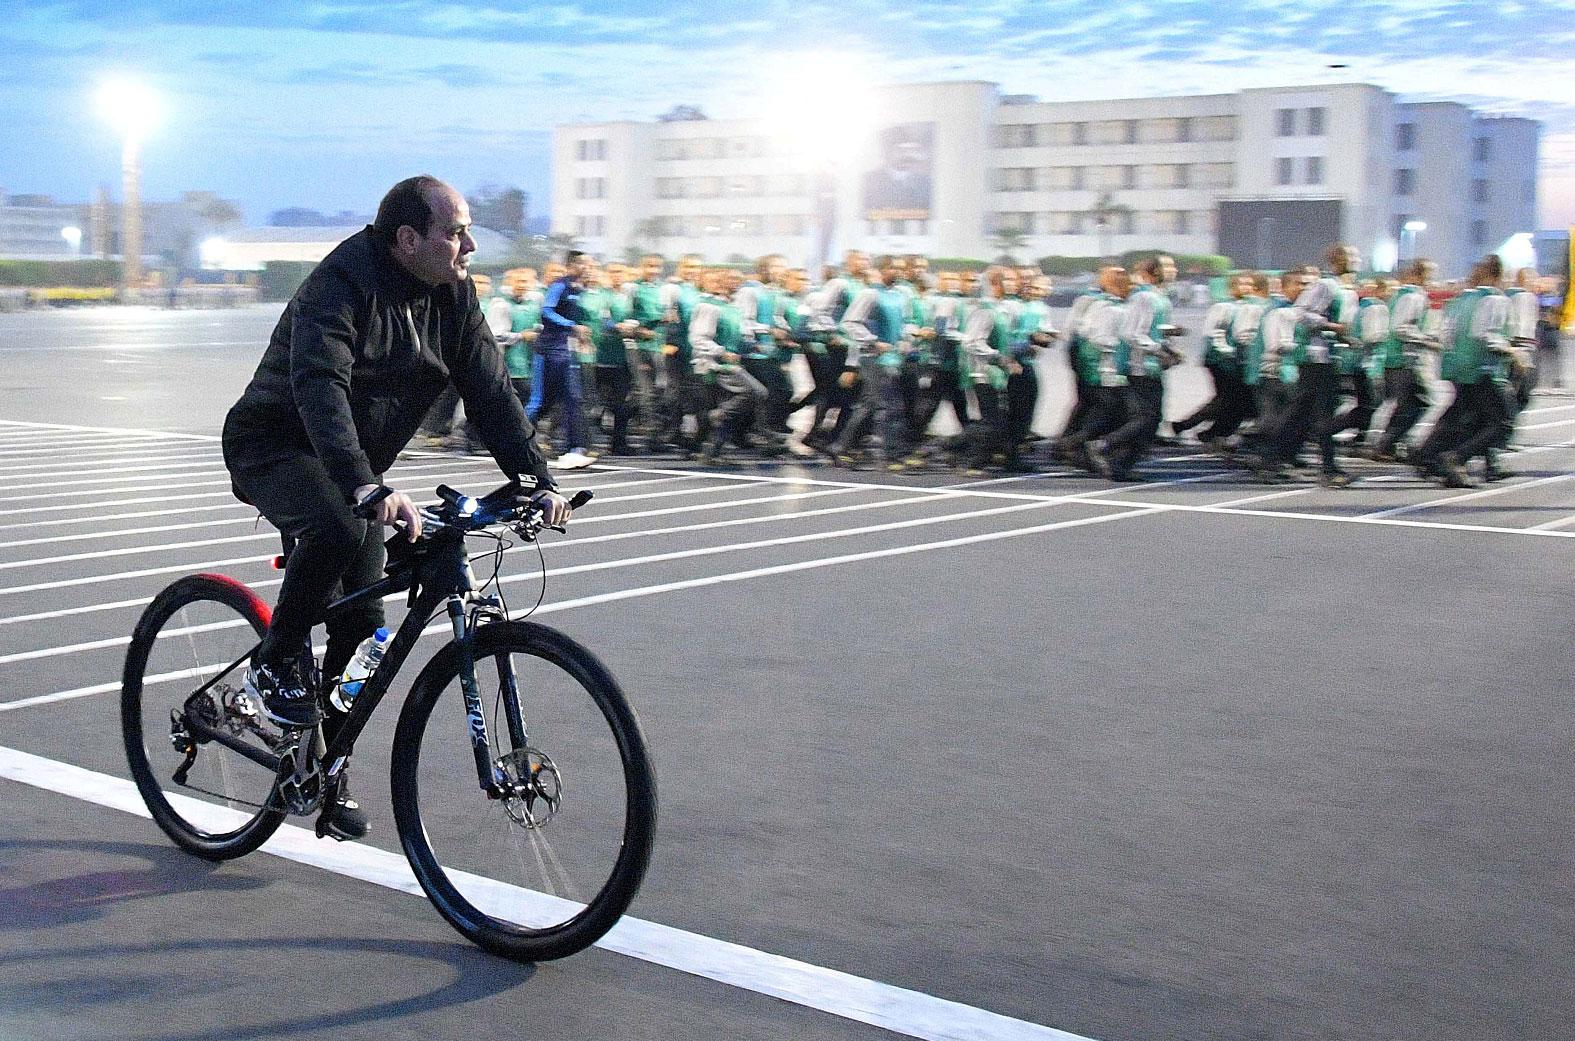 Egyptian President Abdel Fattah Al Sisi rides a bicycle during a follow-up on training and rehabilitation programs at the Military Academy in Cairo, Egypt, February 19, 2018.